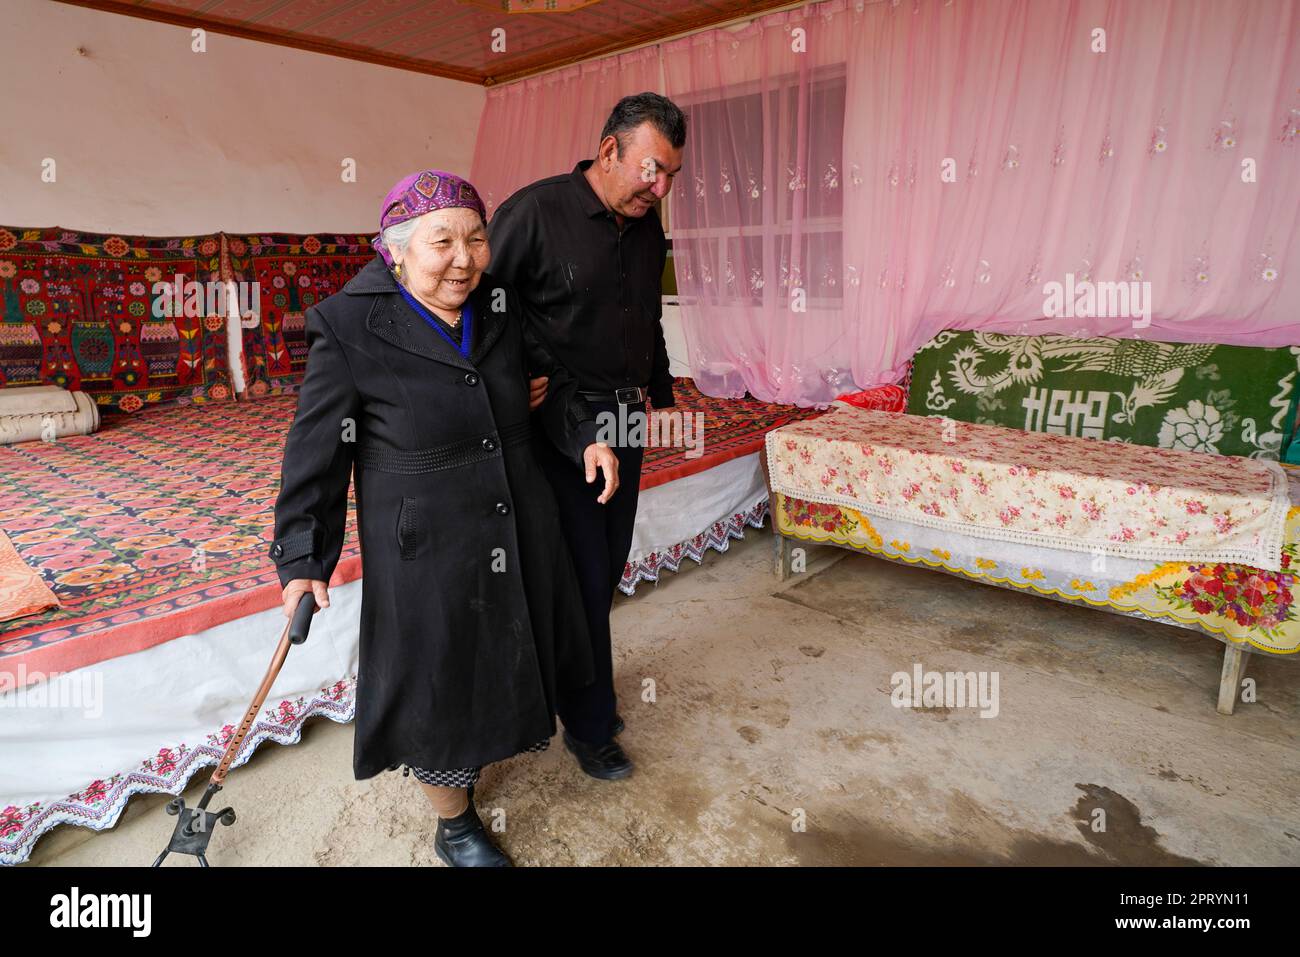 (230427) -- YULI, April 27, 2023 (Xinhua) -- Arkin Reyim takes his mother to go for a meal in the Bax Mali Village of Yuli County, northwest China's Xinjiang Uygur Autonomous Region, April 22, 2023.  Arkin Reyim is a 51-year-old cotton farmer with more than 300 mu (20 hectares) of cotton fields in the Bax Mali Village of Yuli County in Xinjiang.     Arkin's courage and unique vision has prompted him to start growing cotton in 2004 when he got married with his wife Hasiyat Kasim. Since then, Arkin has devoted himself into the cultivation of cotton for over 10 years, thus making him an experienc Stock Photo